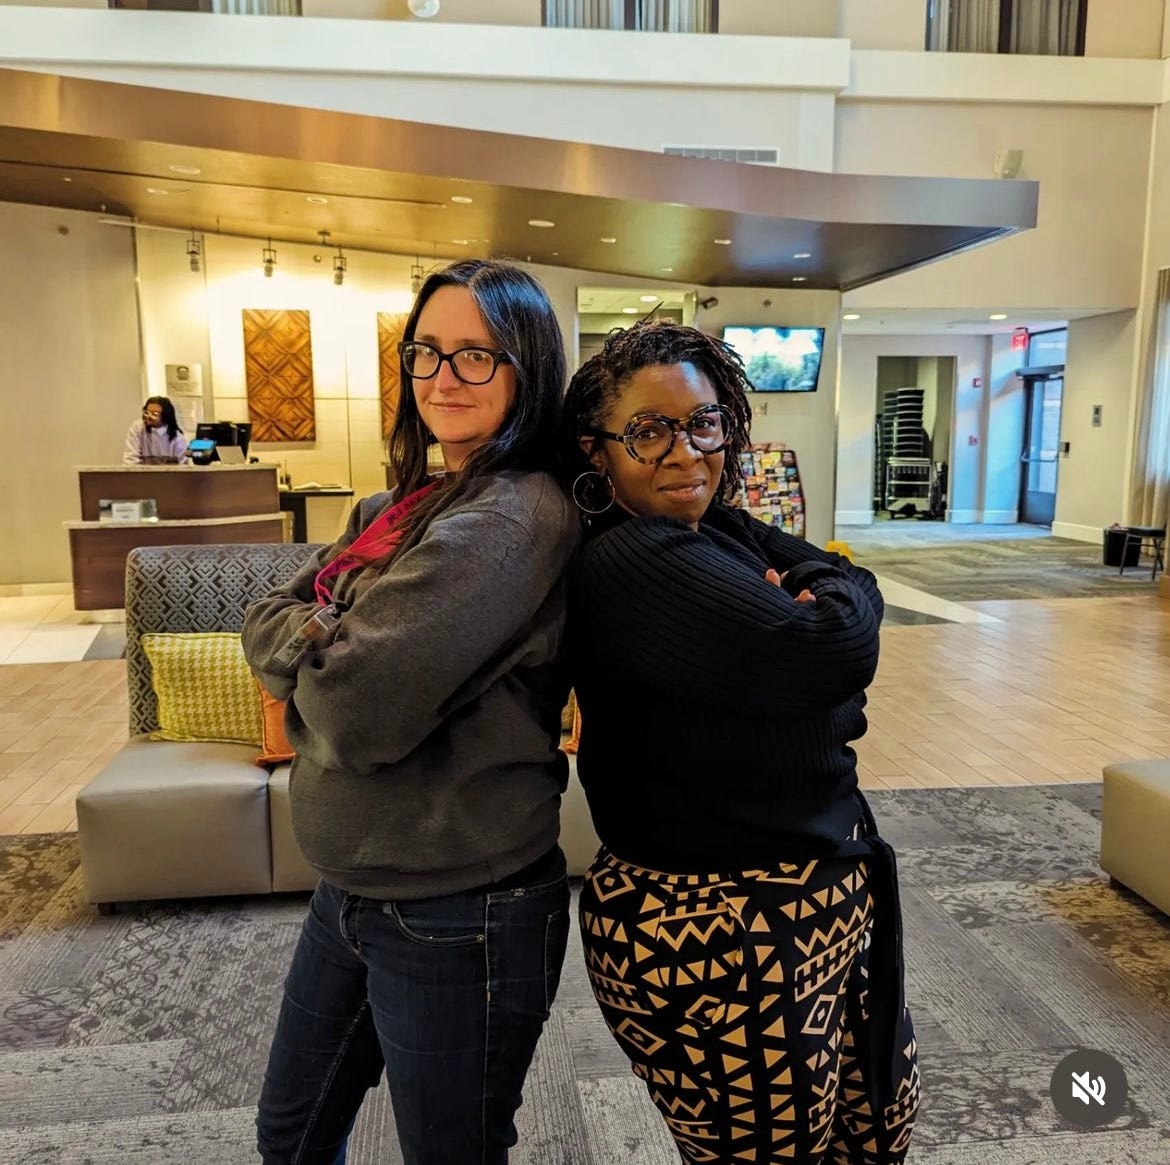 Picture of me, a white woman wearing black glasses and a gray sweatshirt, back-to-back with Nikki Payne, a Black woman wearing circular tortoiseshell glasses and geometric patterned pants